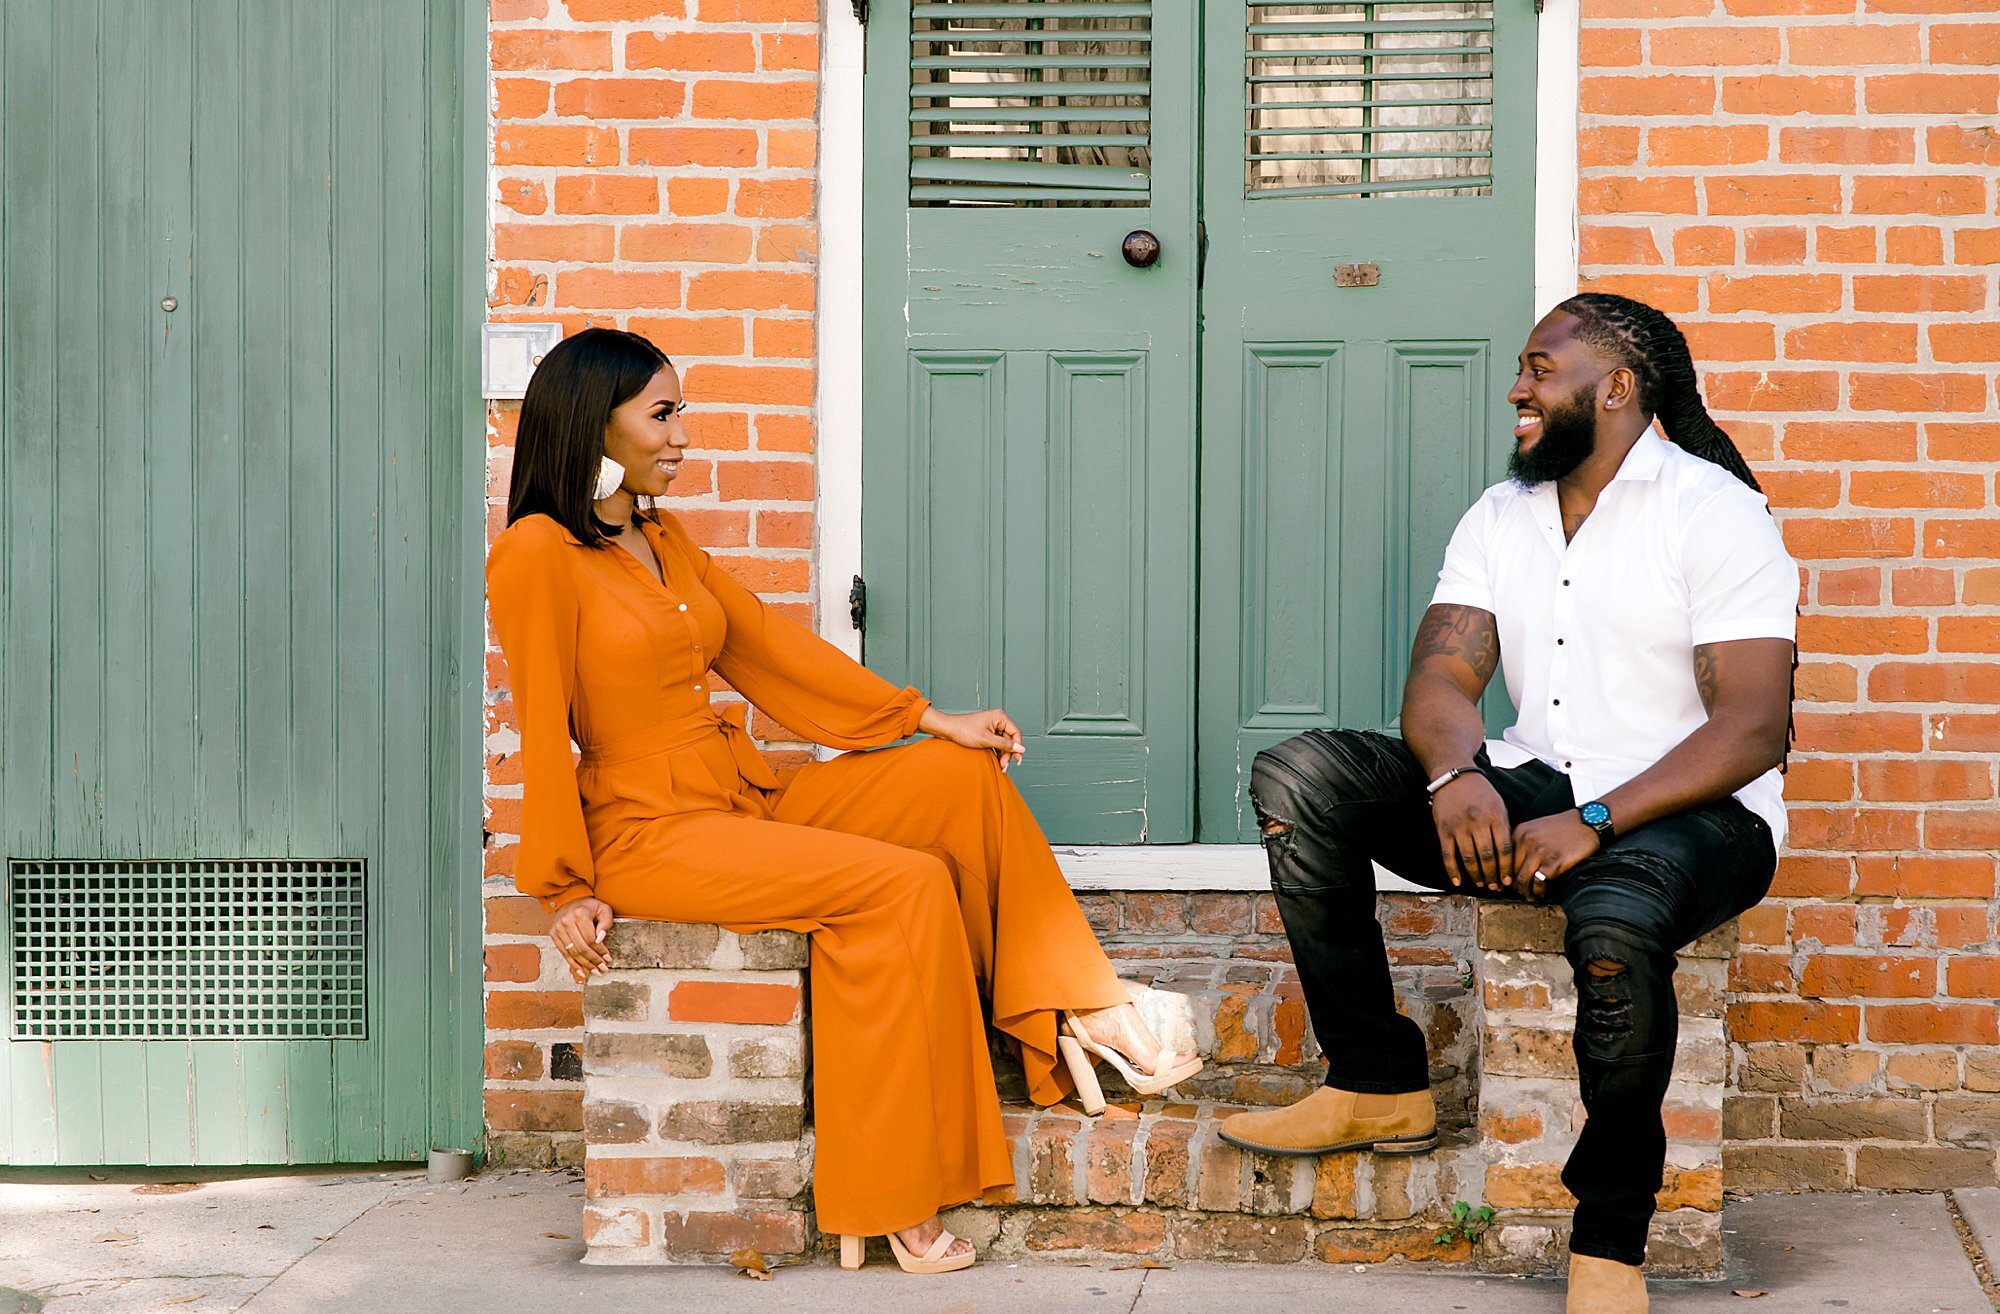 French Quarter Engagement Shoot-New Orleans French Quarter-New Orleans Photographer_0130.jpg